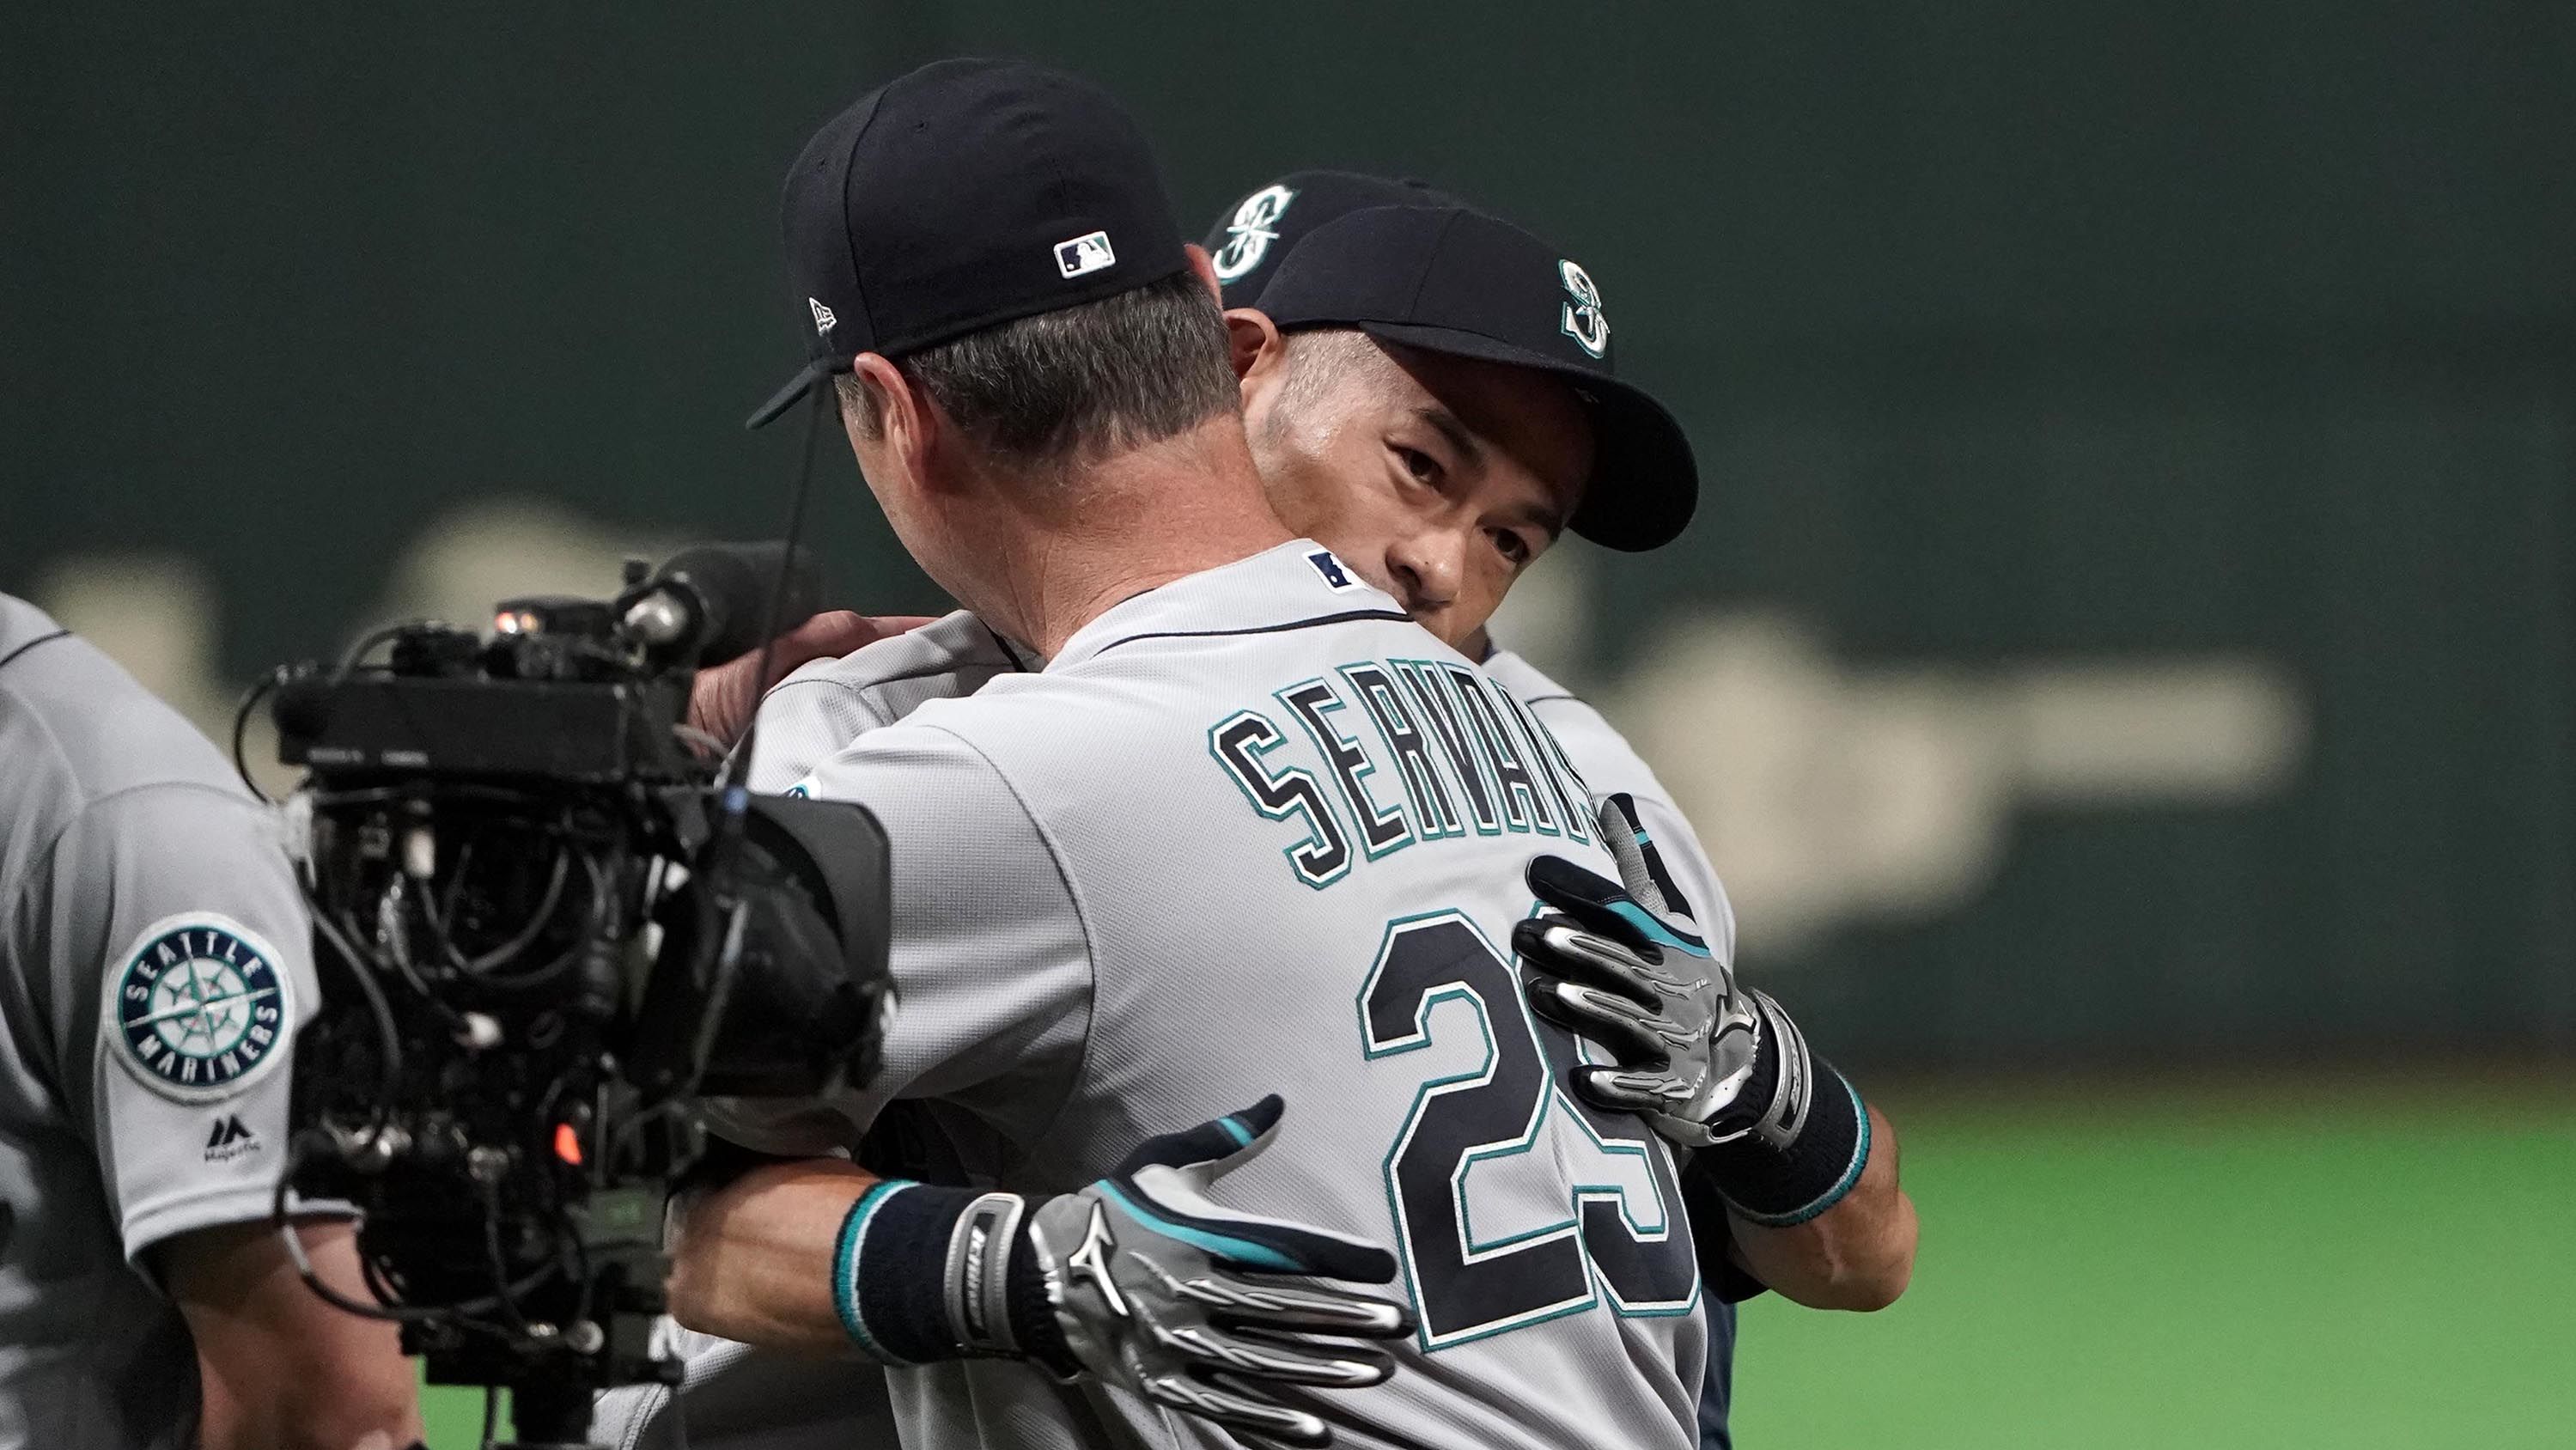 Ichiro hugs Mariners manager Scott Servais as he is introduced prior to the game.